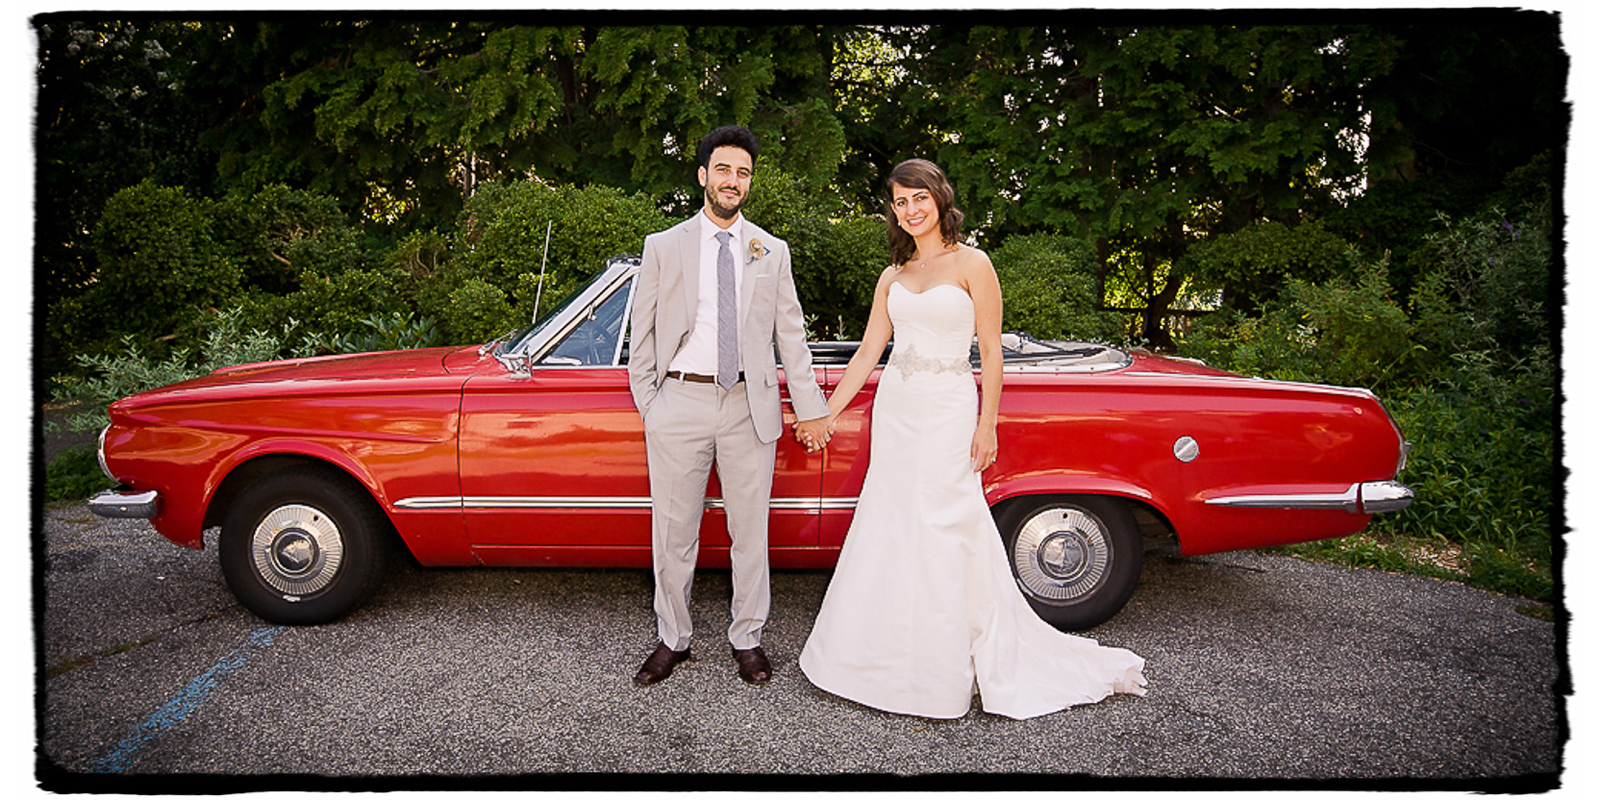 Tracey and Ben definitely wanted a shot with the vintage convertable that was to be their getaway car at the end of this vintage DIY themed wedding at Alder Manor.